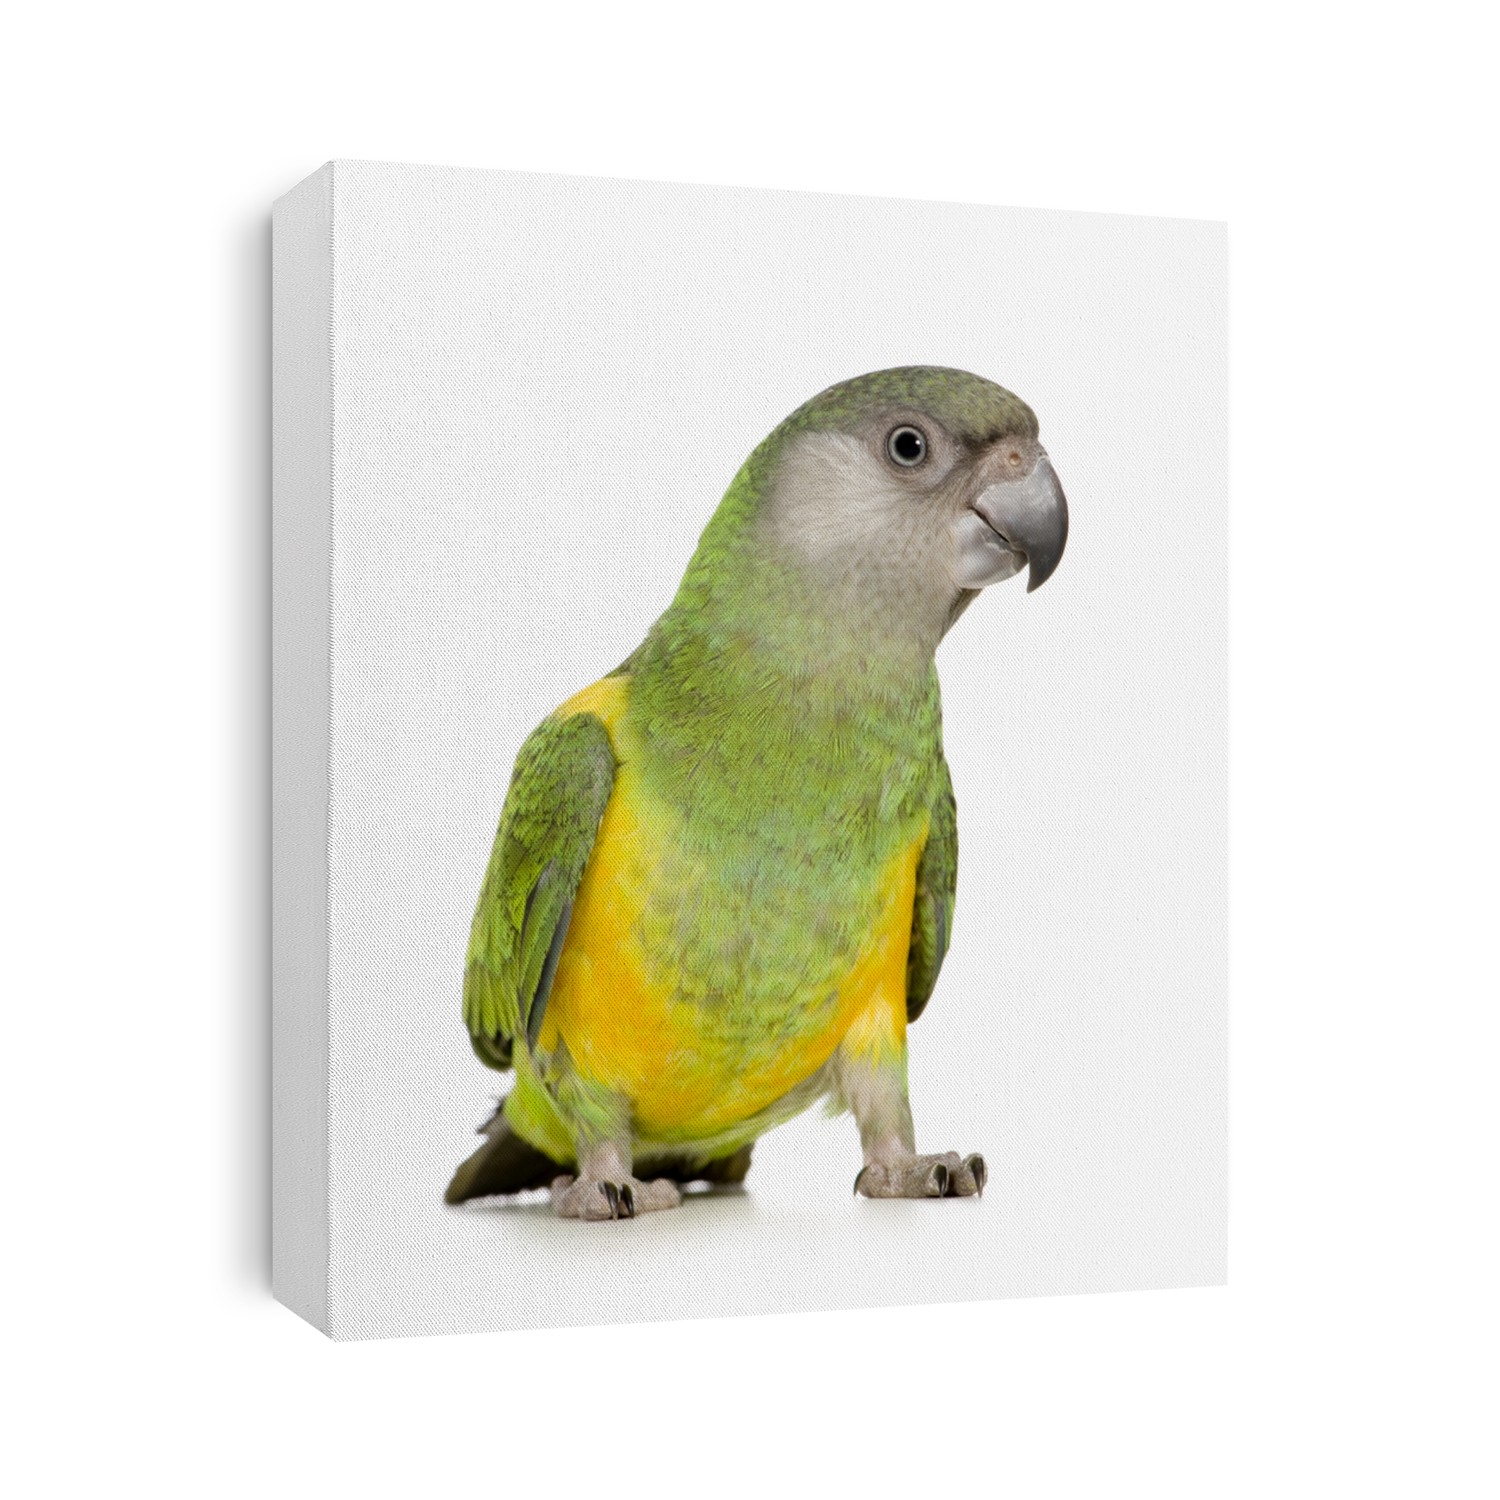 Senegal Parrot - Poicephalus senegalus in front of a white background